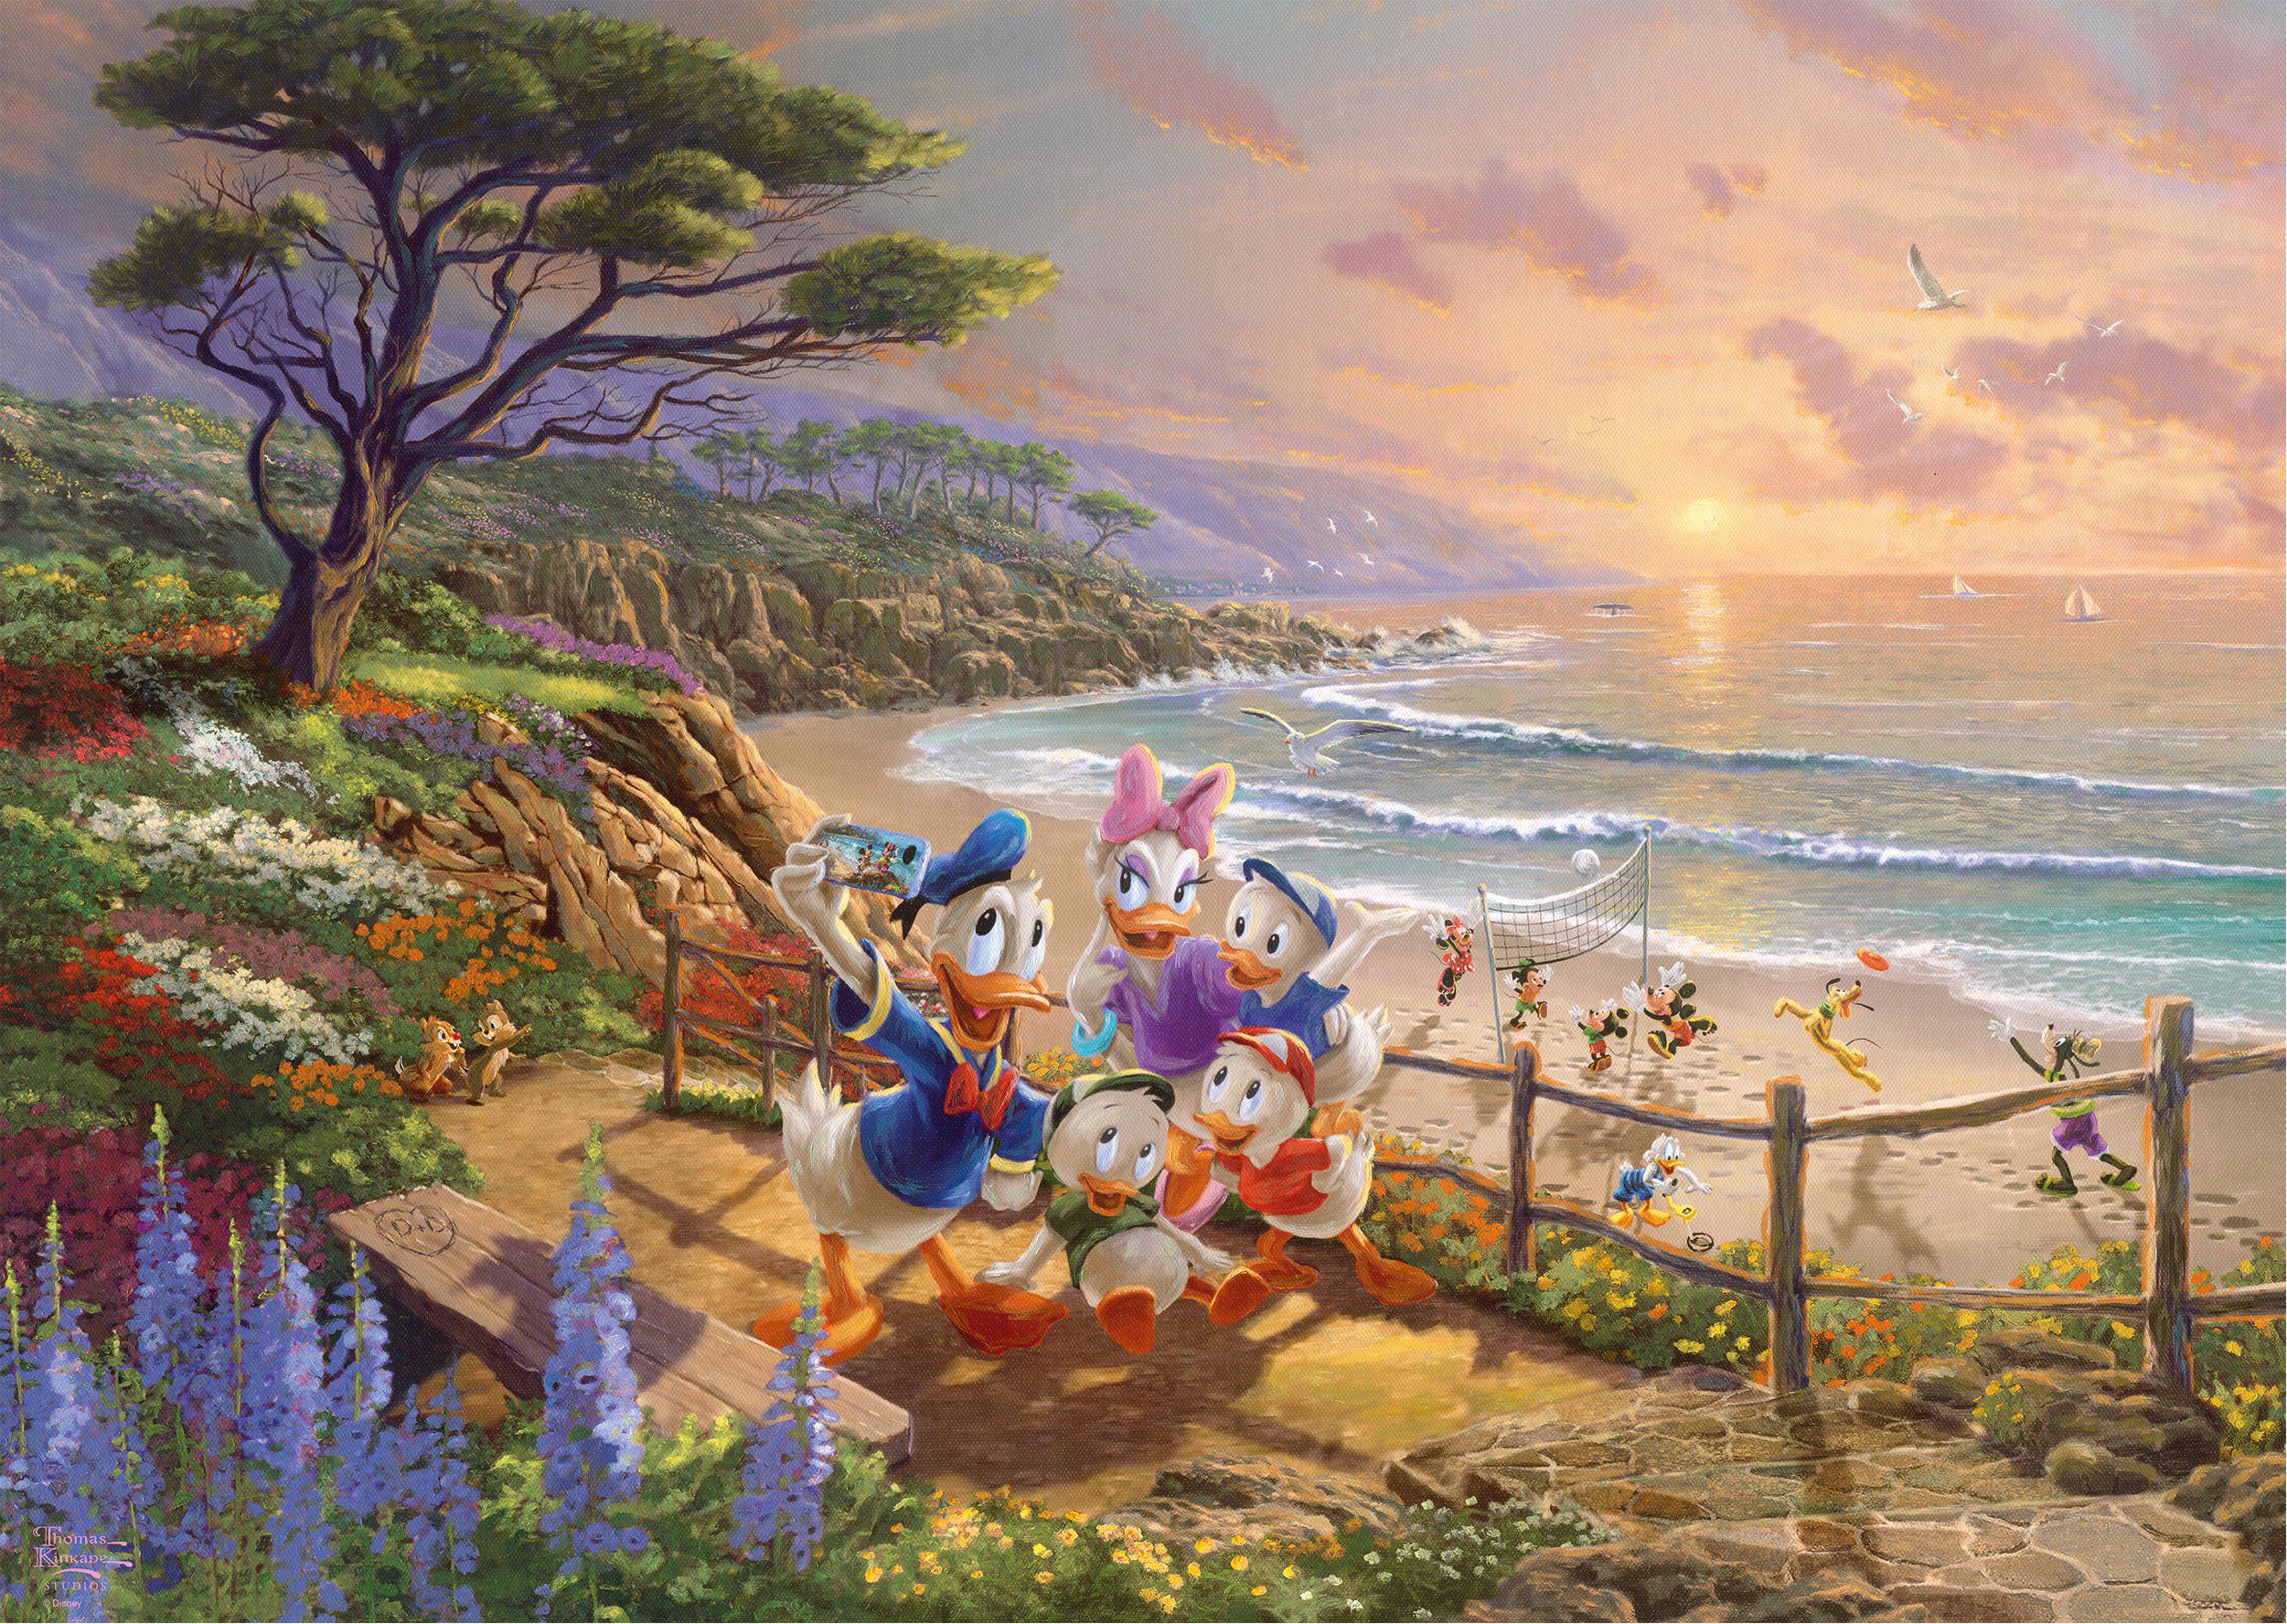 Thomas Kinkade: Donald and Daisy, A Duck Day Afternoon